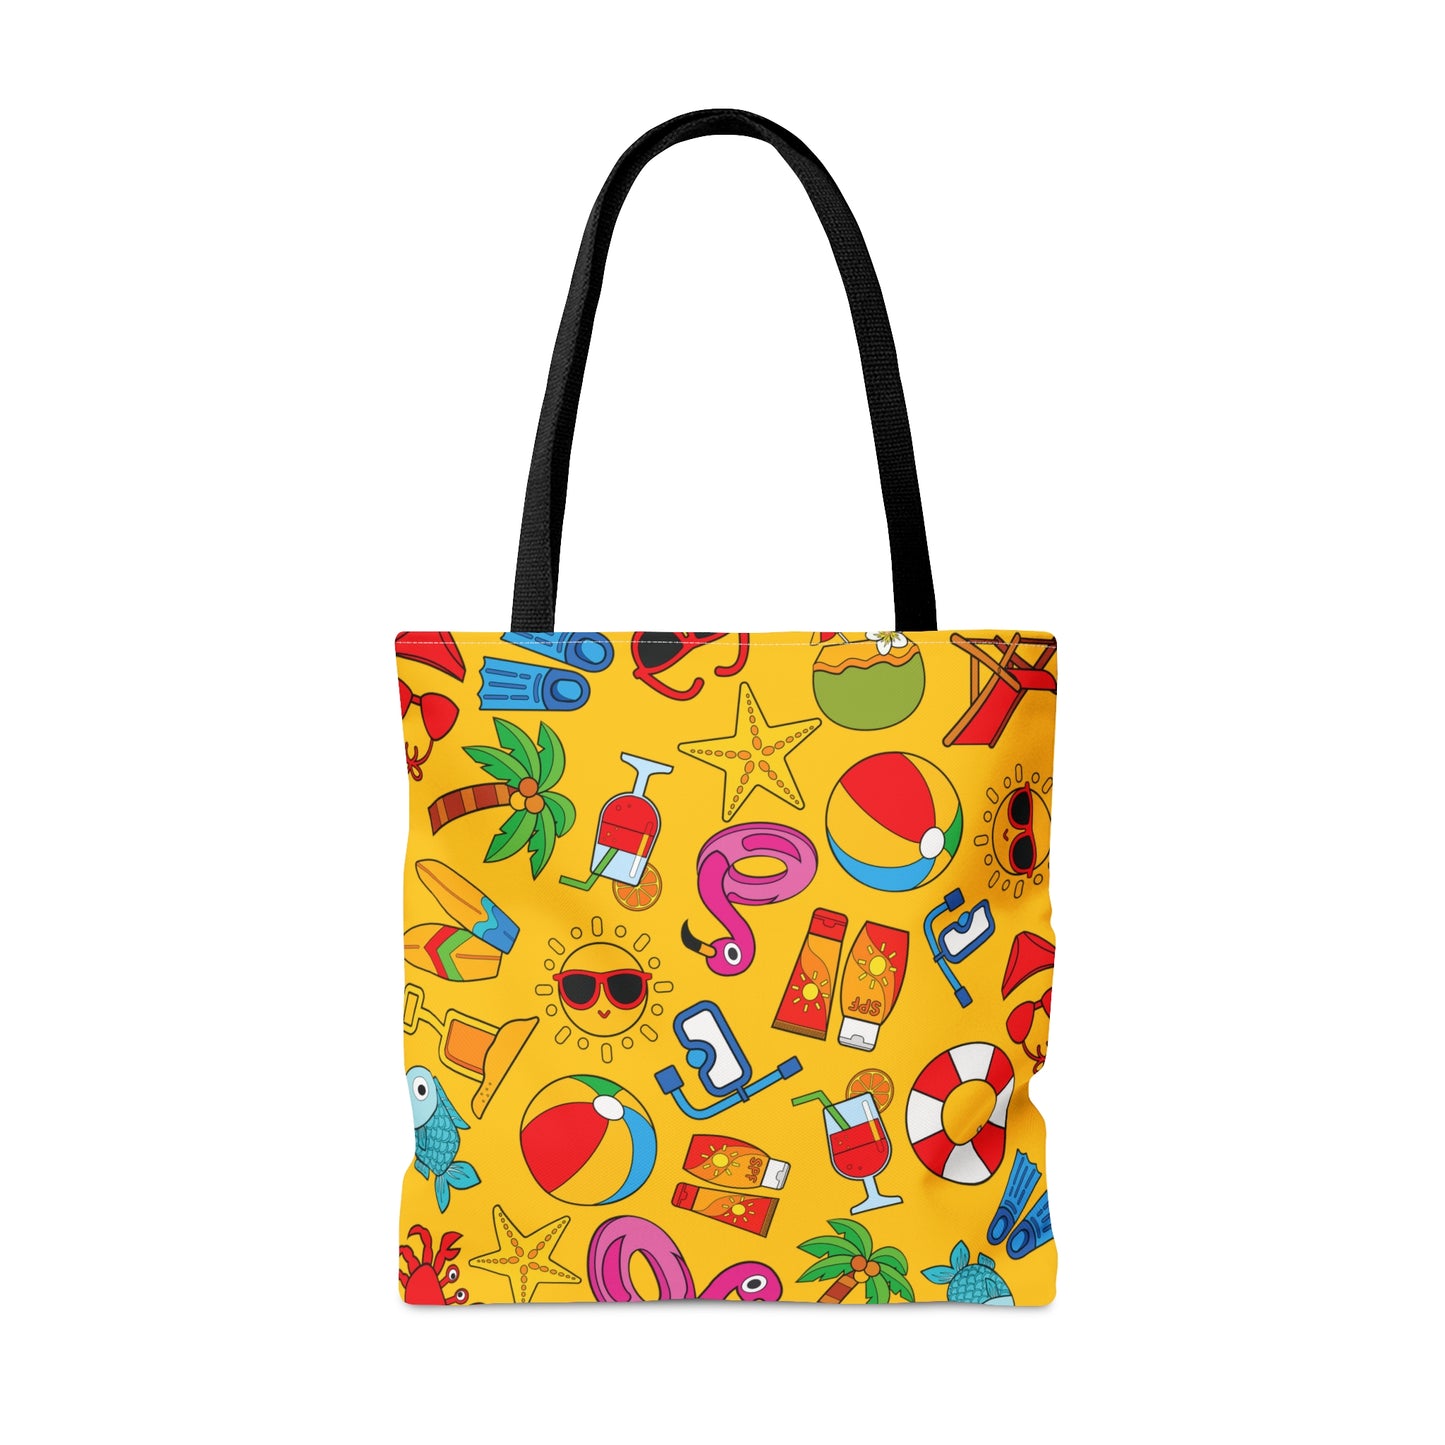 Summer Vibes - Gold Color ffcc00 - Tote Bag